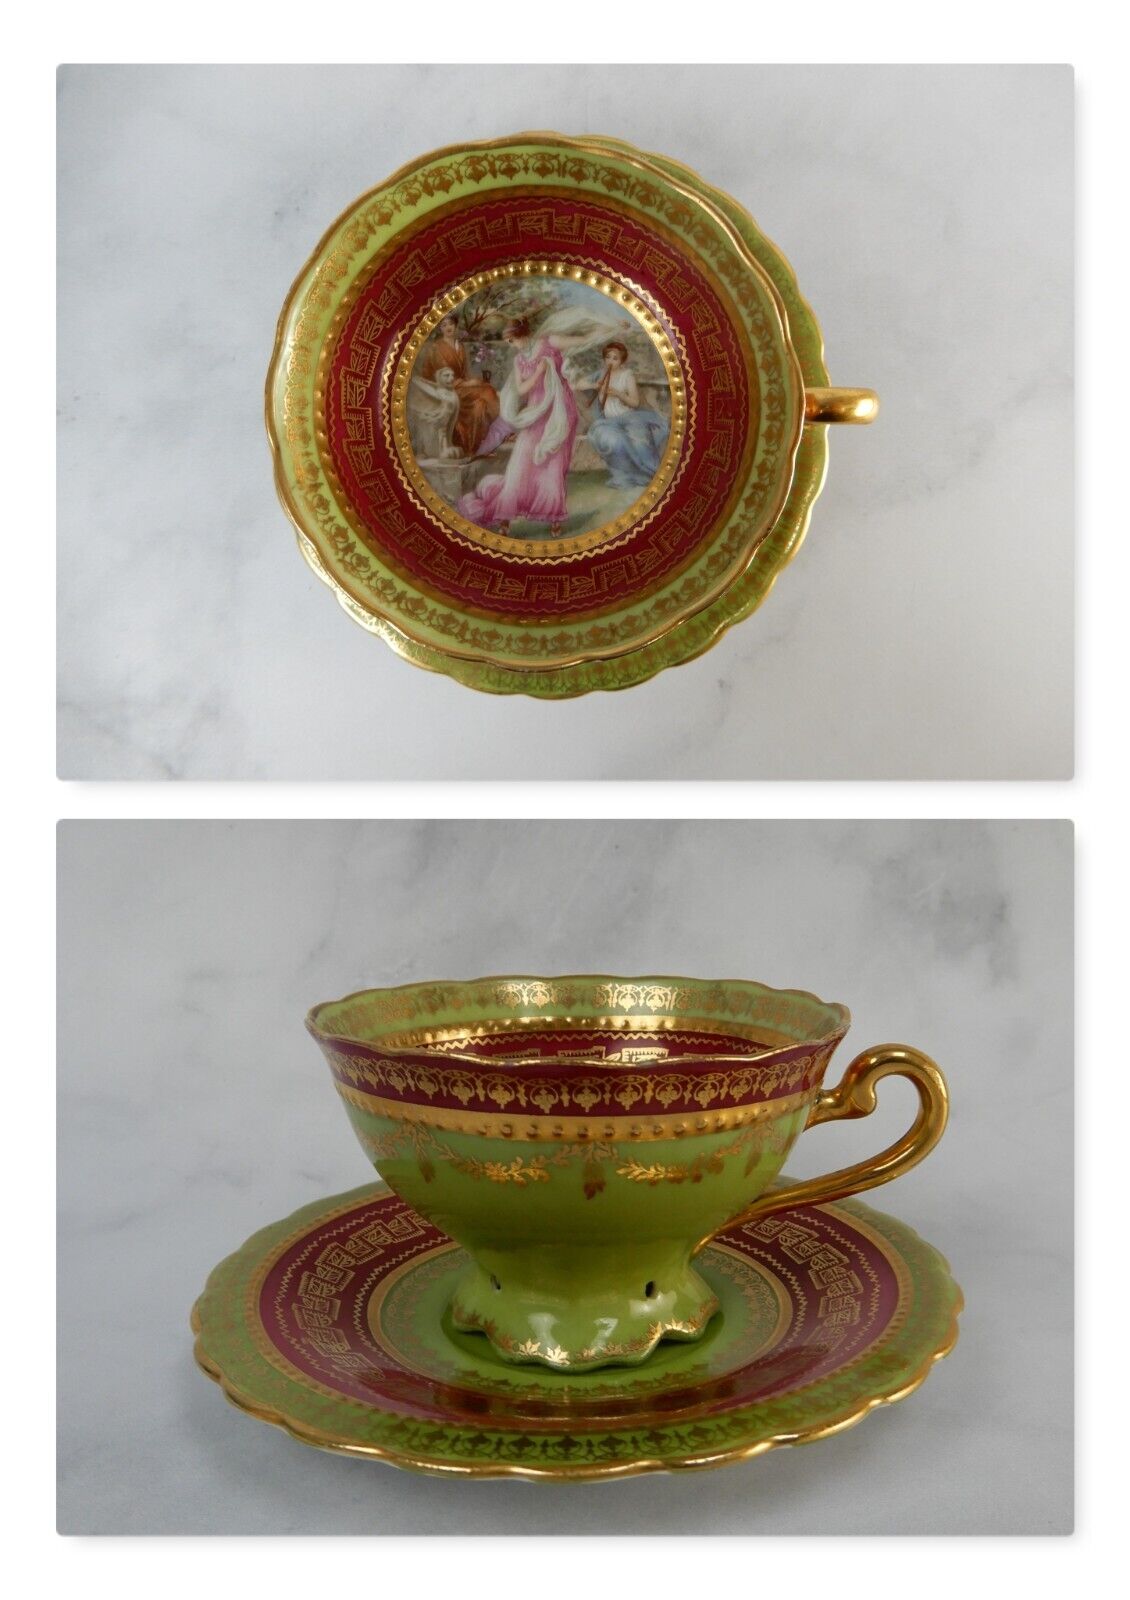 Antique Royal Vienna Porcelain Demitasse Cup & Saucer Green and Burgundy Red